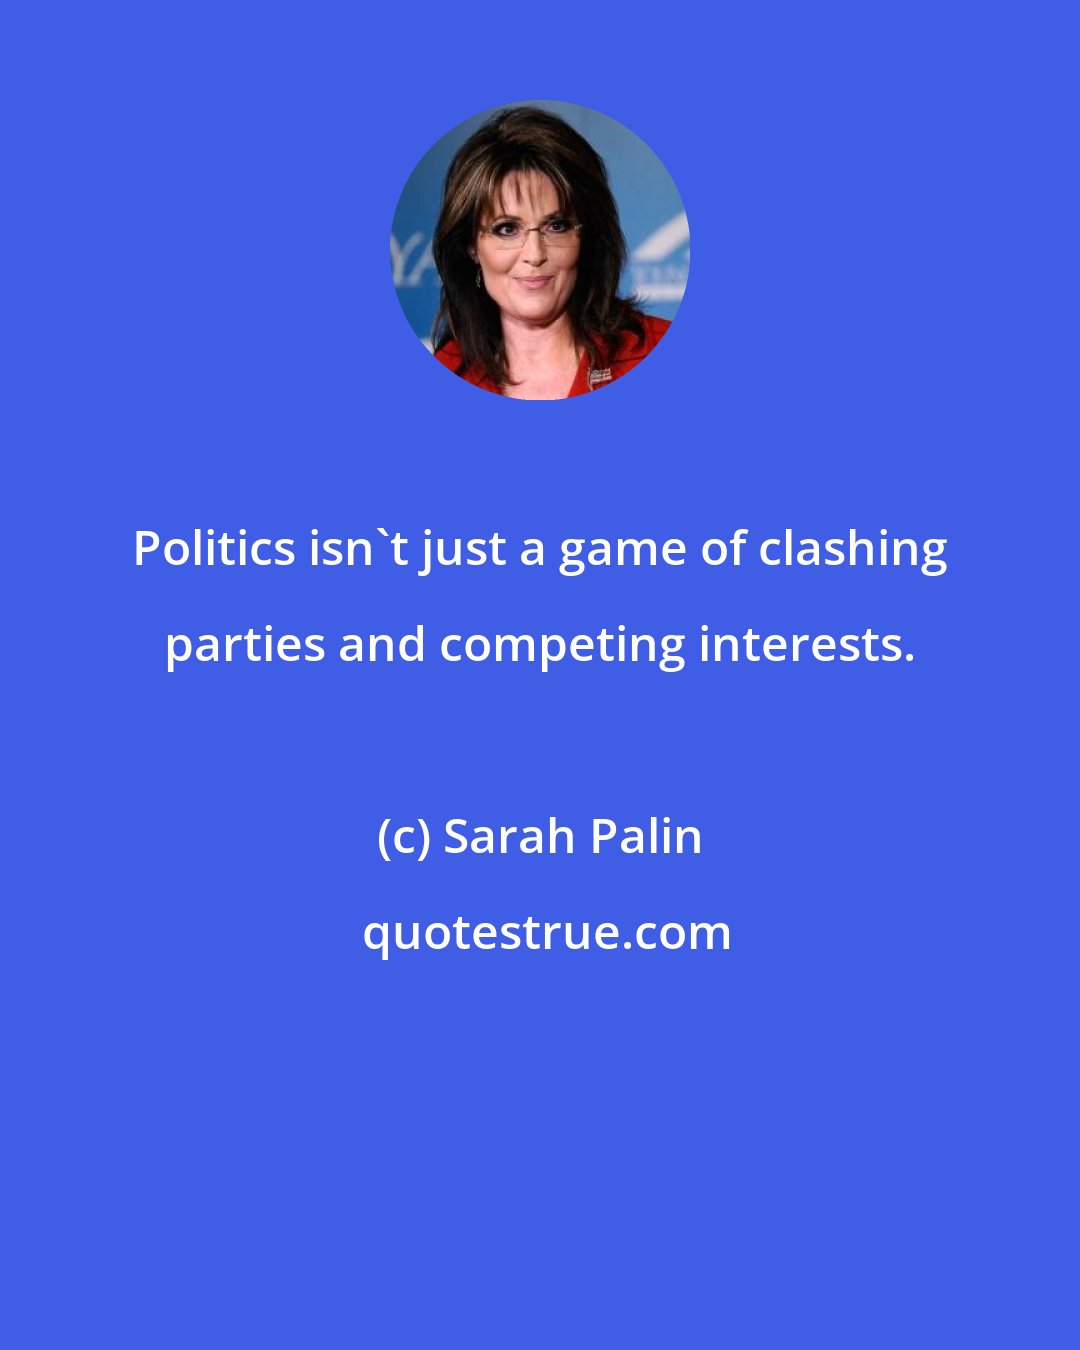 Sarah Palin: Politics isn't just a game of clashing parties and competing interests.